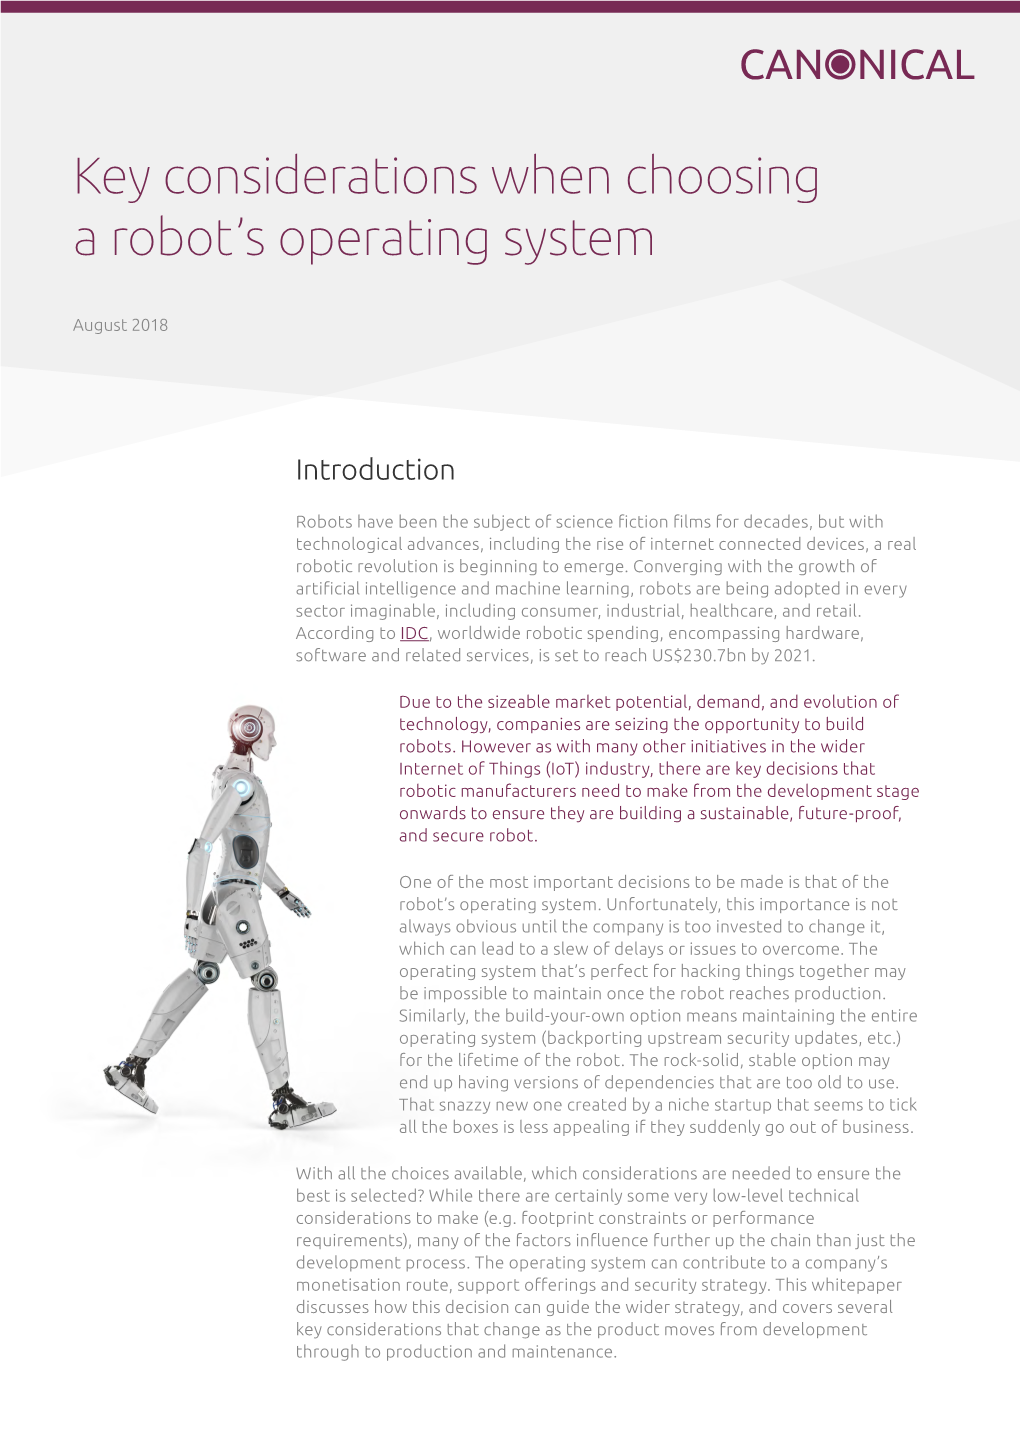 Key Considerations When Choosing a Robot's Operating System